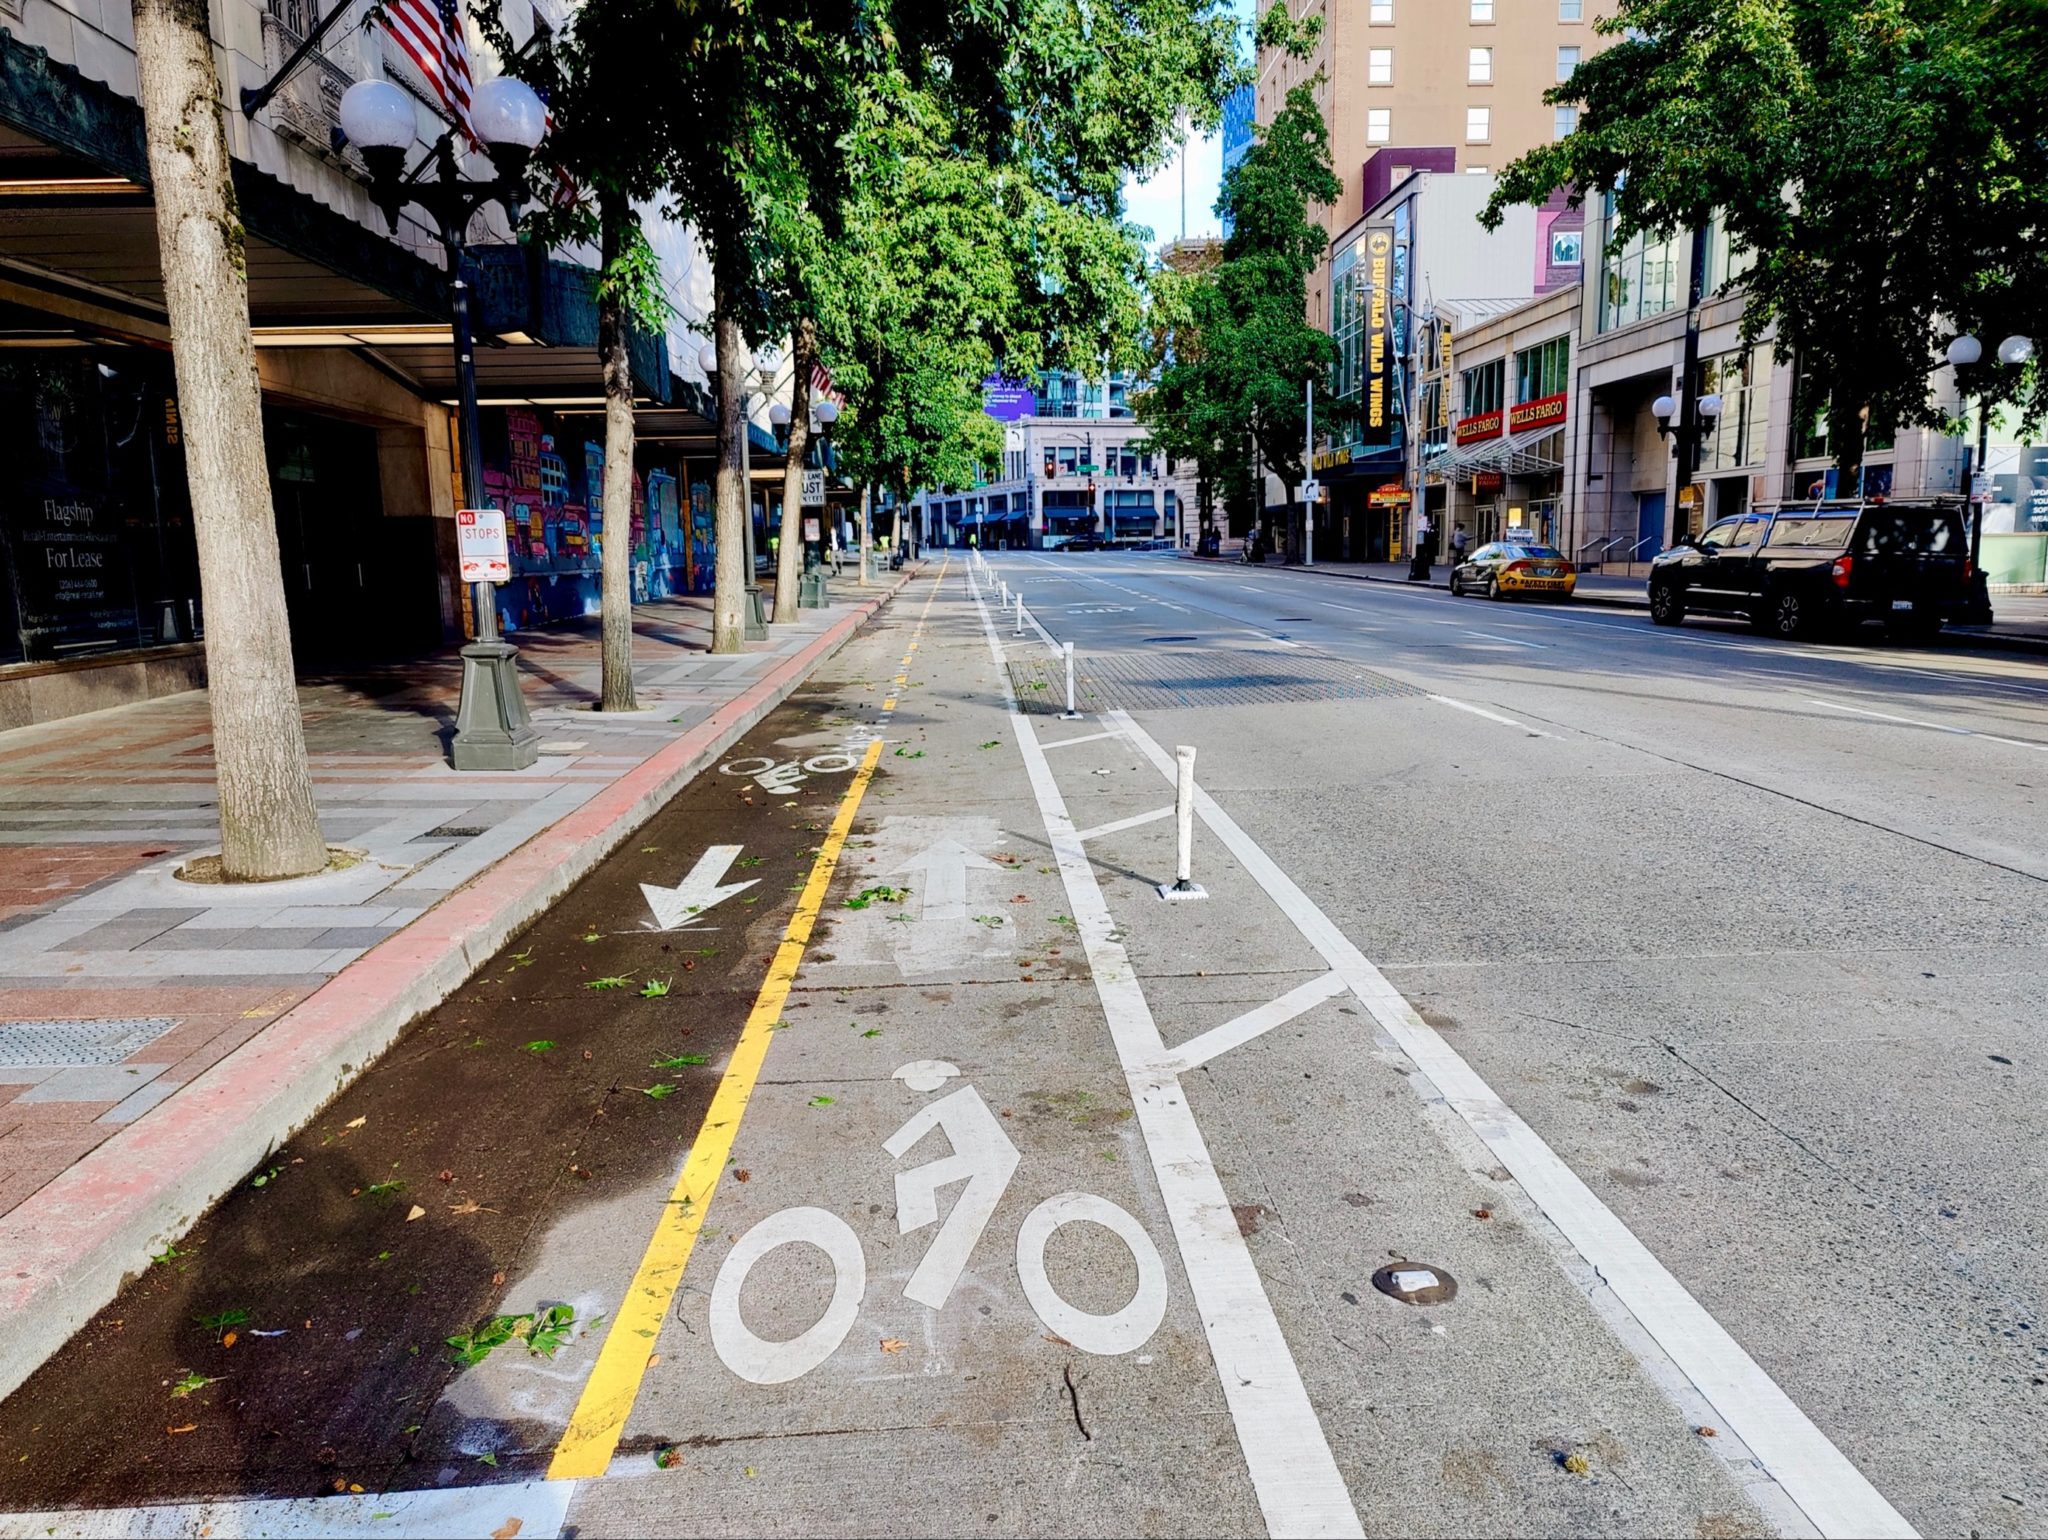 Photo of the new 4th Ave protected bike lane in downtown Seattle. The new two-wake bike lane is visible in the center, extending into the background. The sidewalk is visible on the left, and vehicular lanes of 4th Ave to the right. Buildings and trees are also visible in the photo.